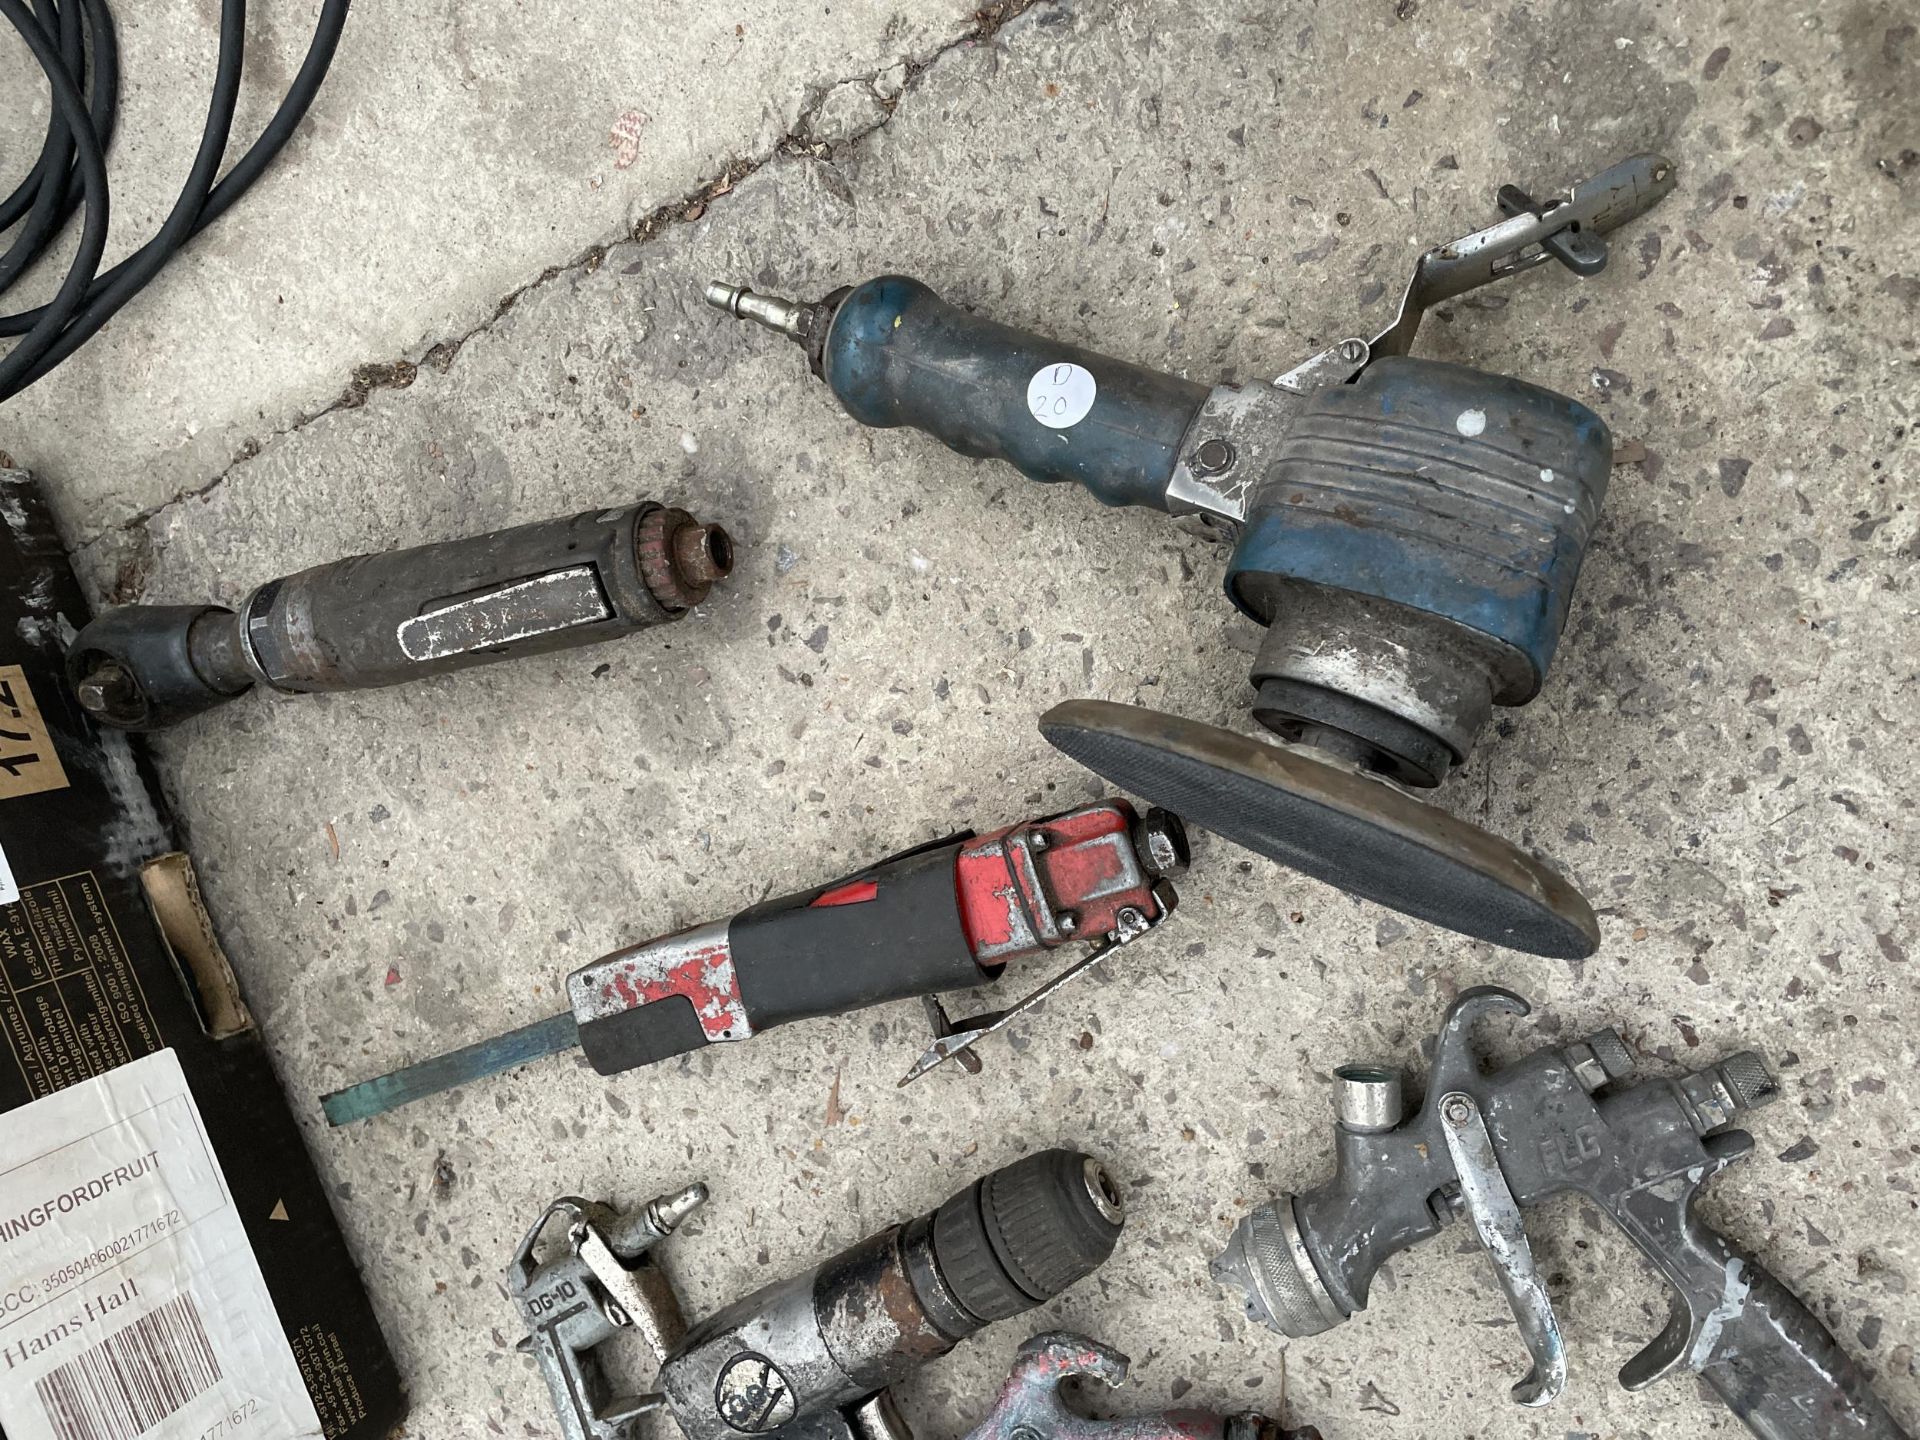 AN ASSORTMENT OF AIR COMPRESSOR TOOLS TO INCLUDE A DRILL, A SANDER AND A TORQUE WRENCH ETC - Image 3 of 3